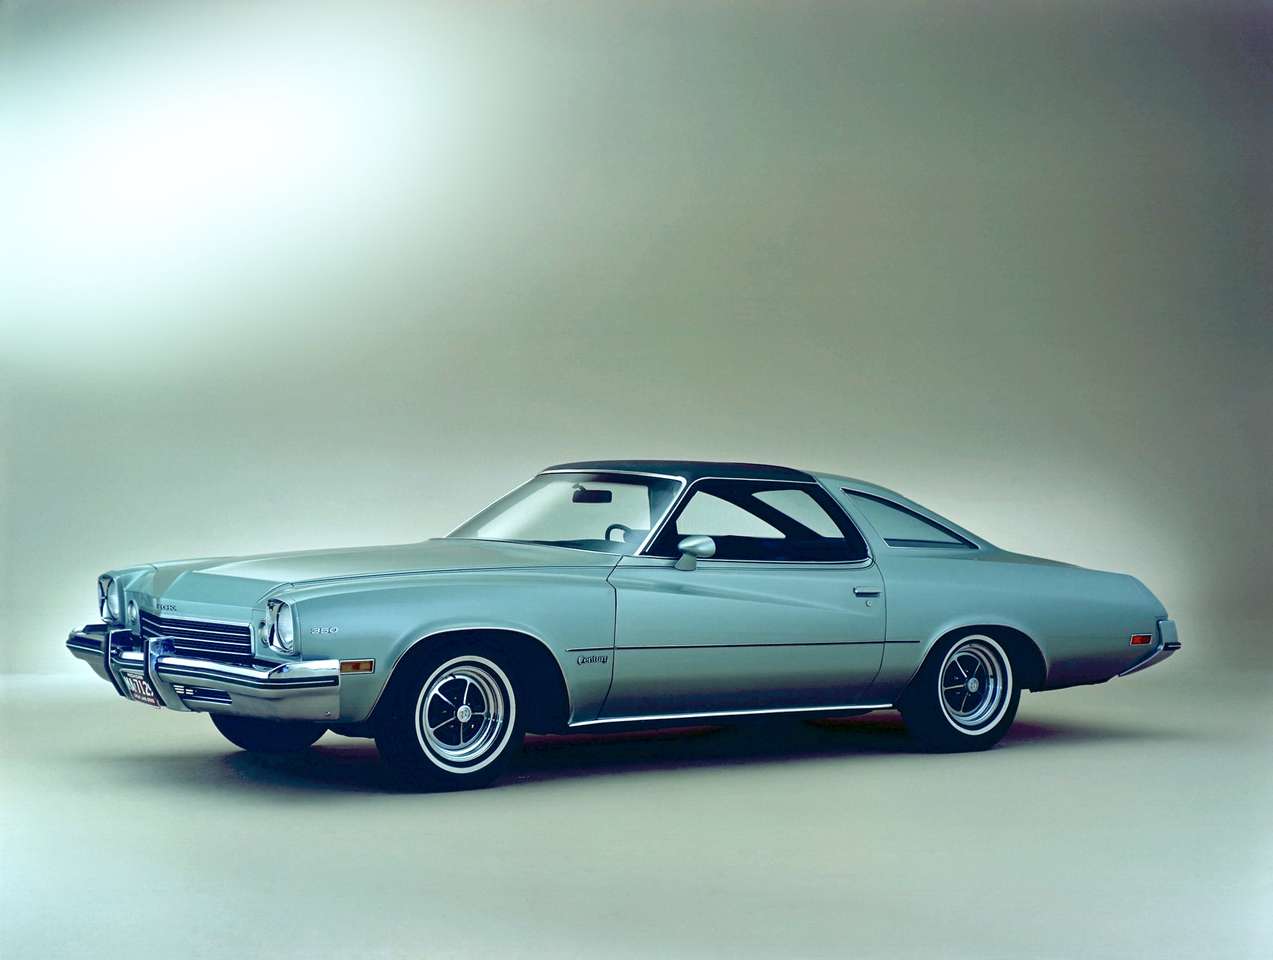 1973 Buick Century Hardtop Coupe jigsaw puzzle online